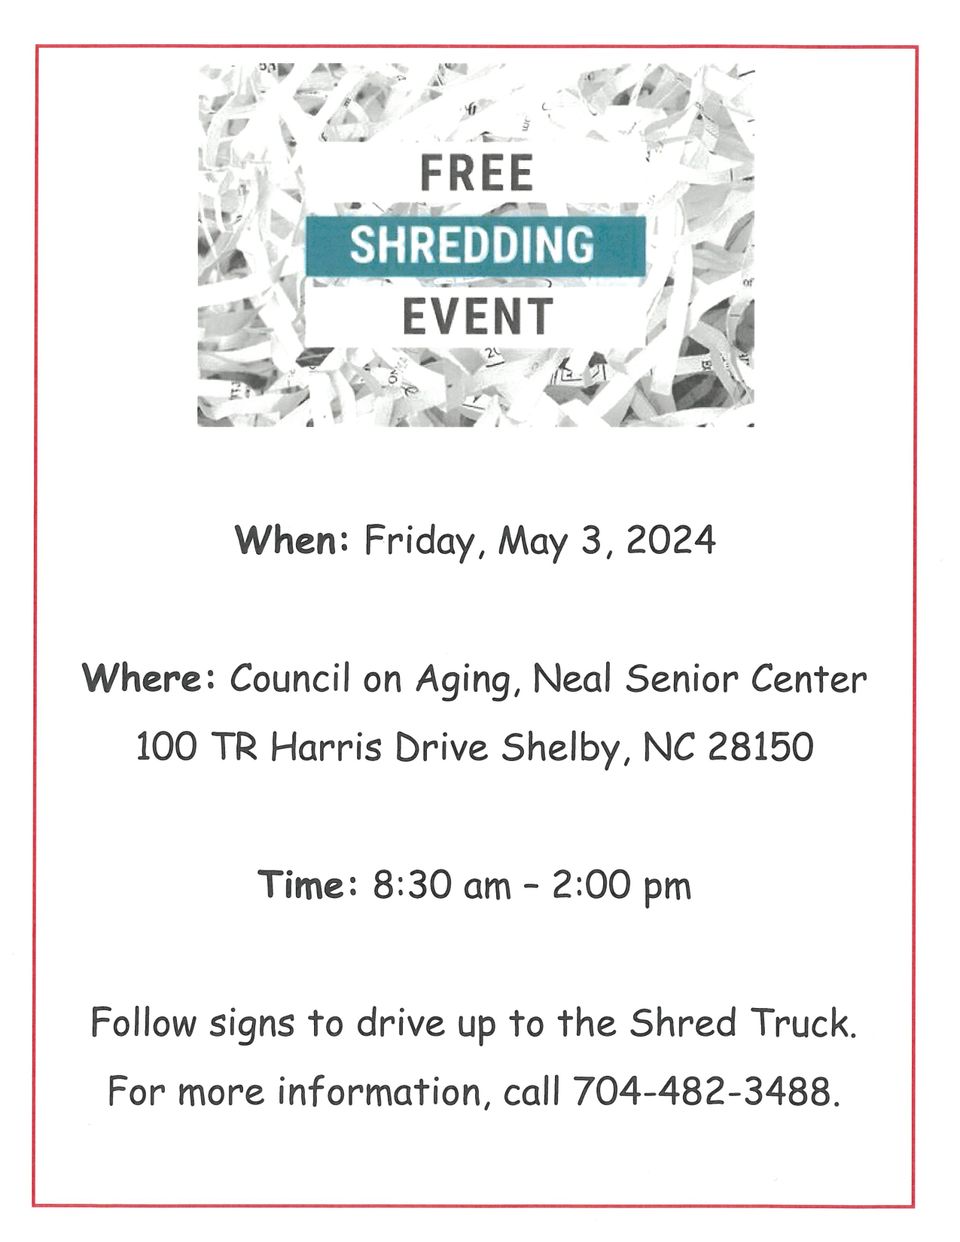 Poster may shredding event